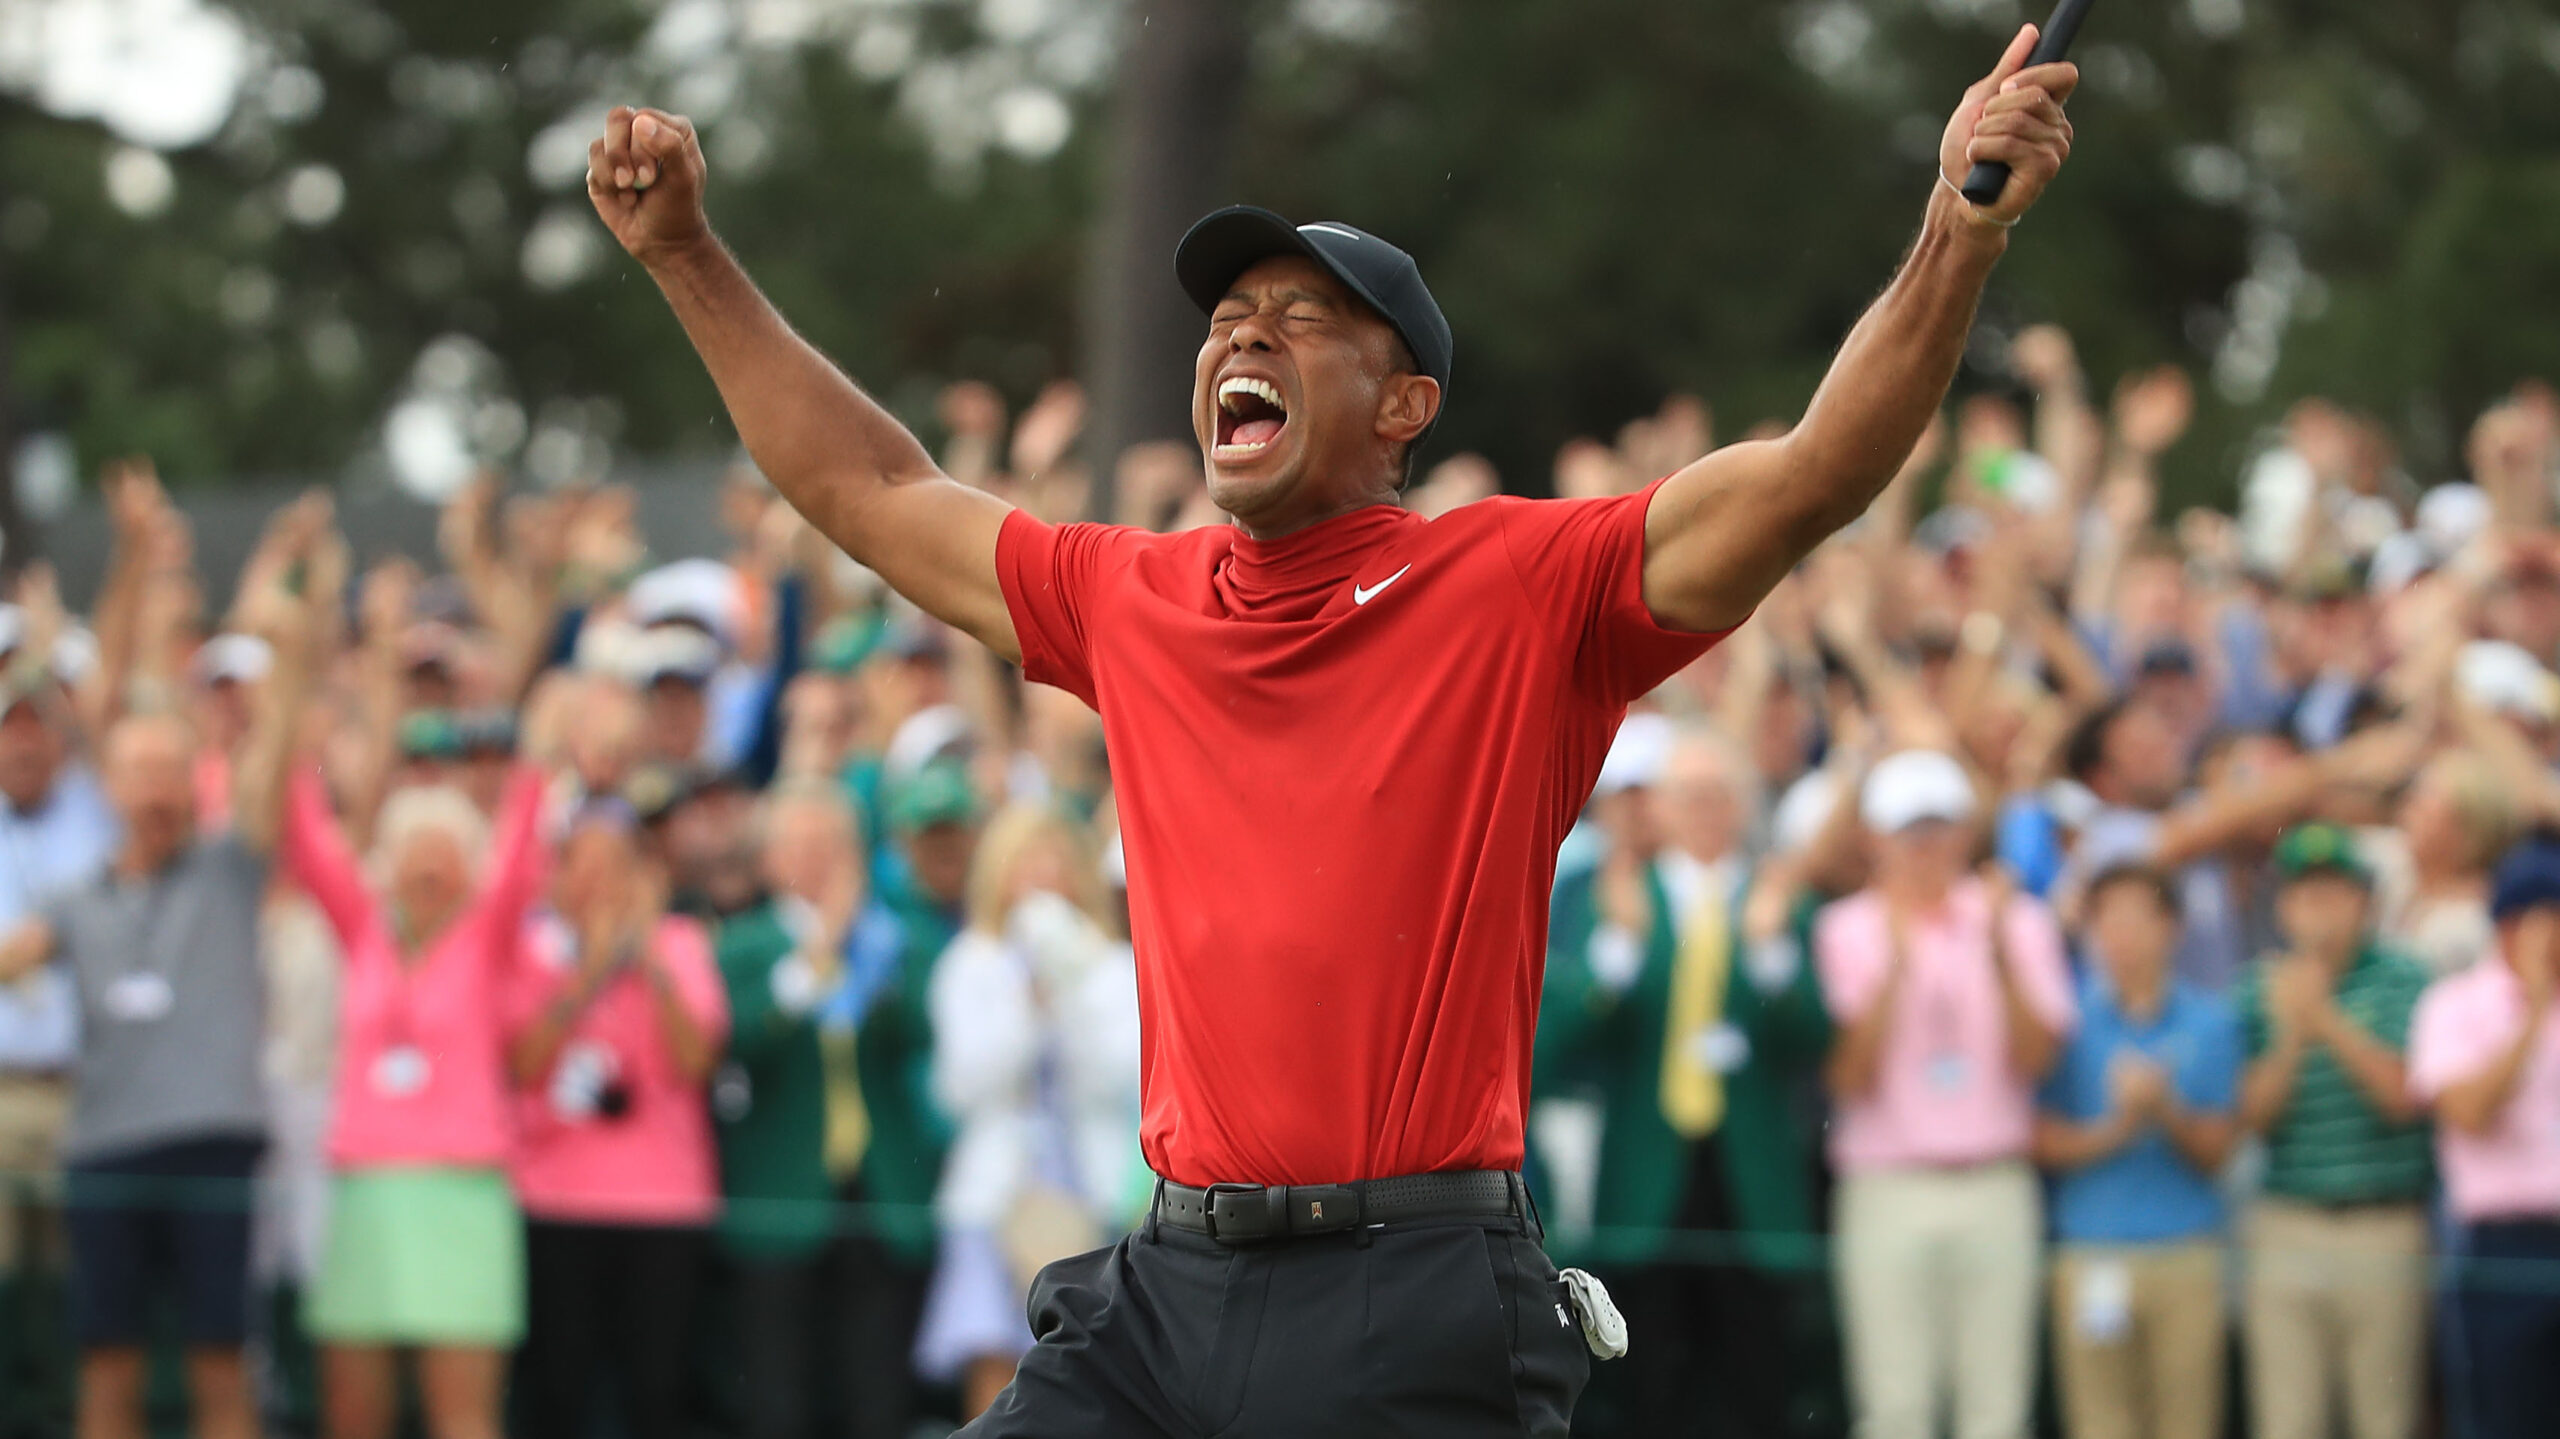 Tiger Woods’ partnership with Nike is over. Here are 5 iconic ads we’ll never forget